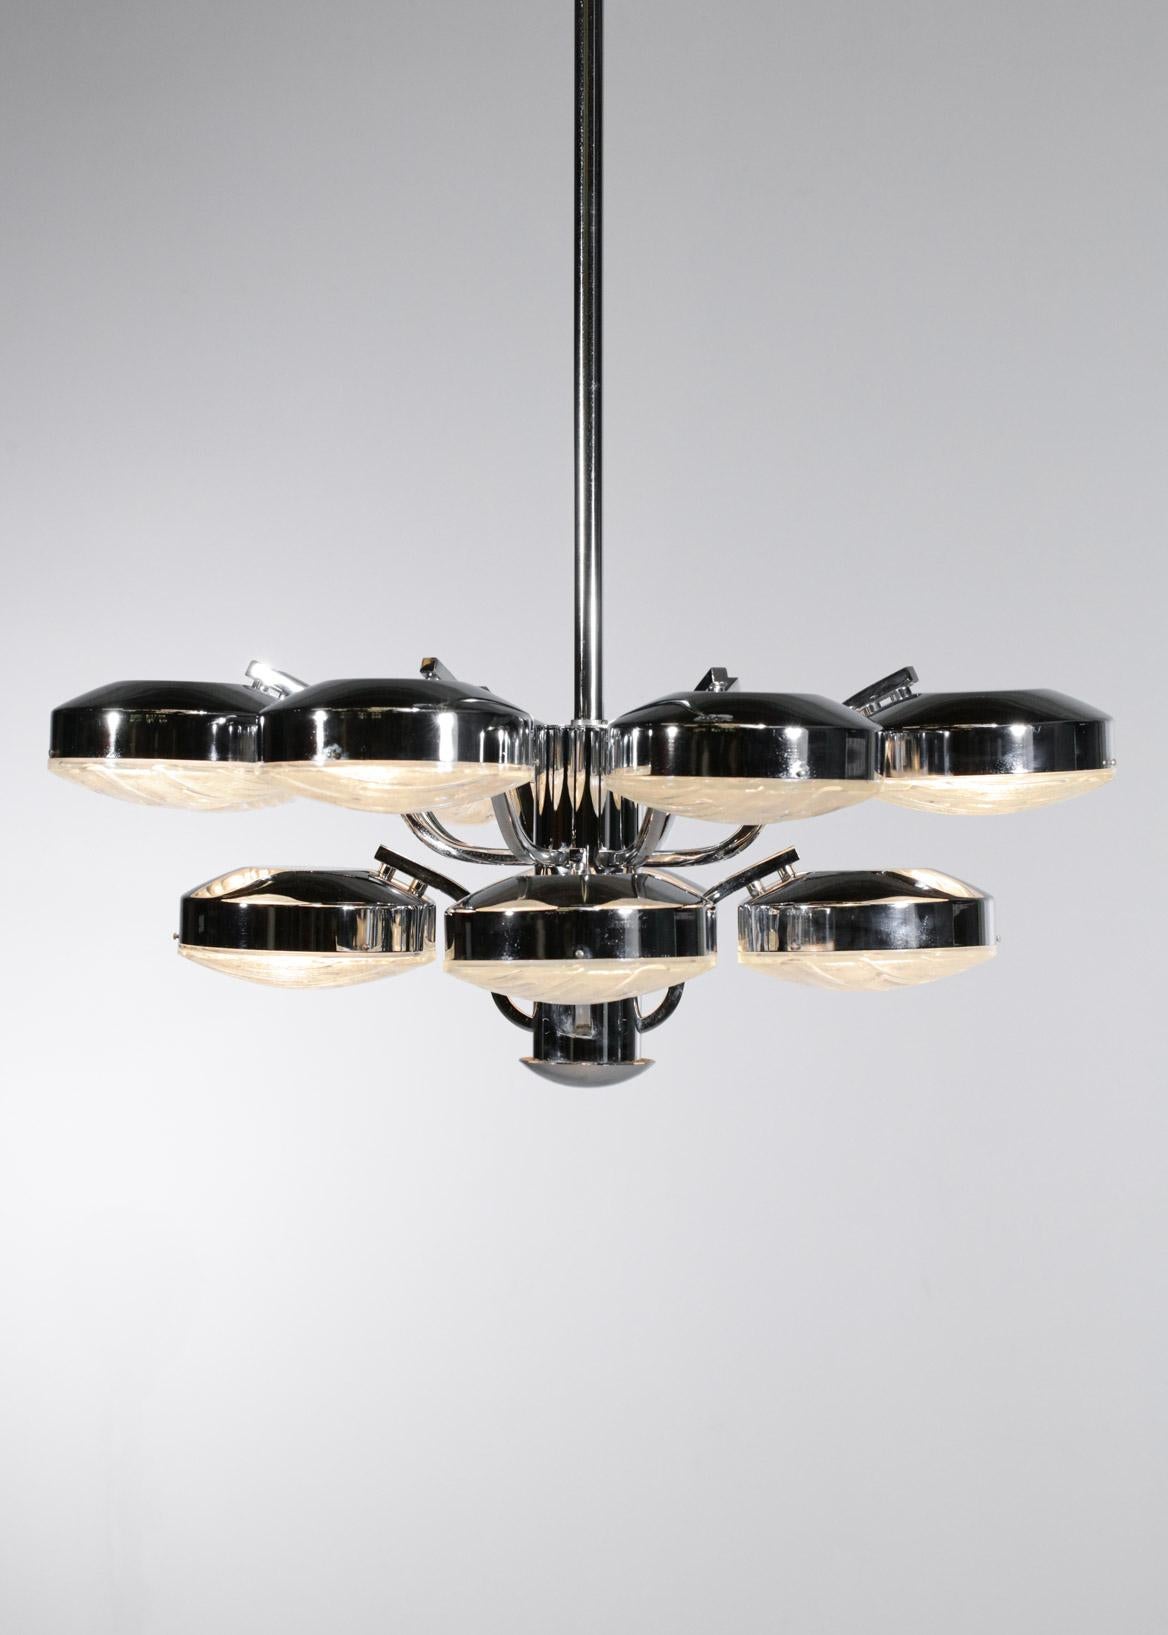 Imposing Italian chandelier from the 70's, chromed metal structure composed of twelve arms with removable thick glass diffusers. Sober and pure lines but very decorative recalling the work of Gaetano Sciolari. Very nice vintage condition, note the